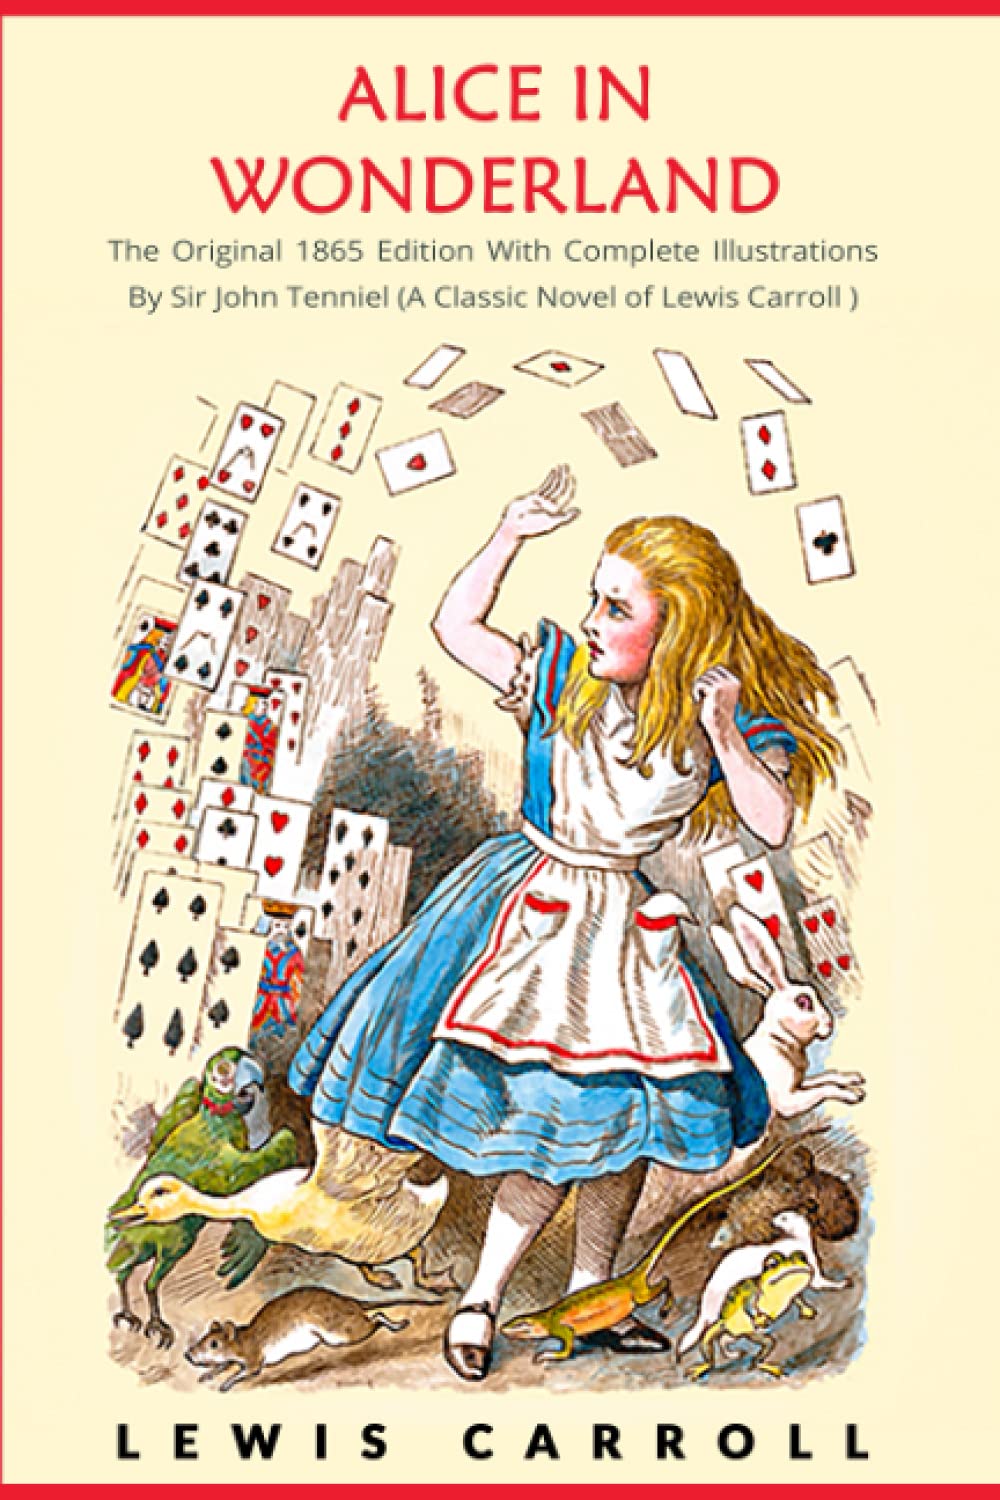 Alice in Wonderland by Lewis Carroll - Counsel Cast